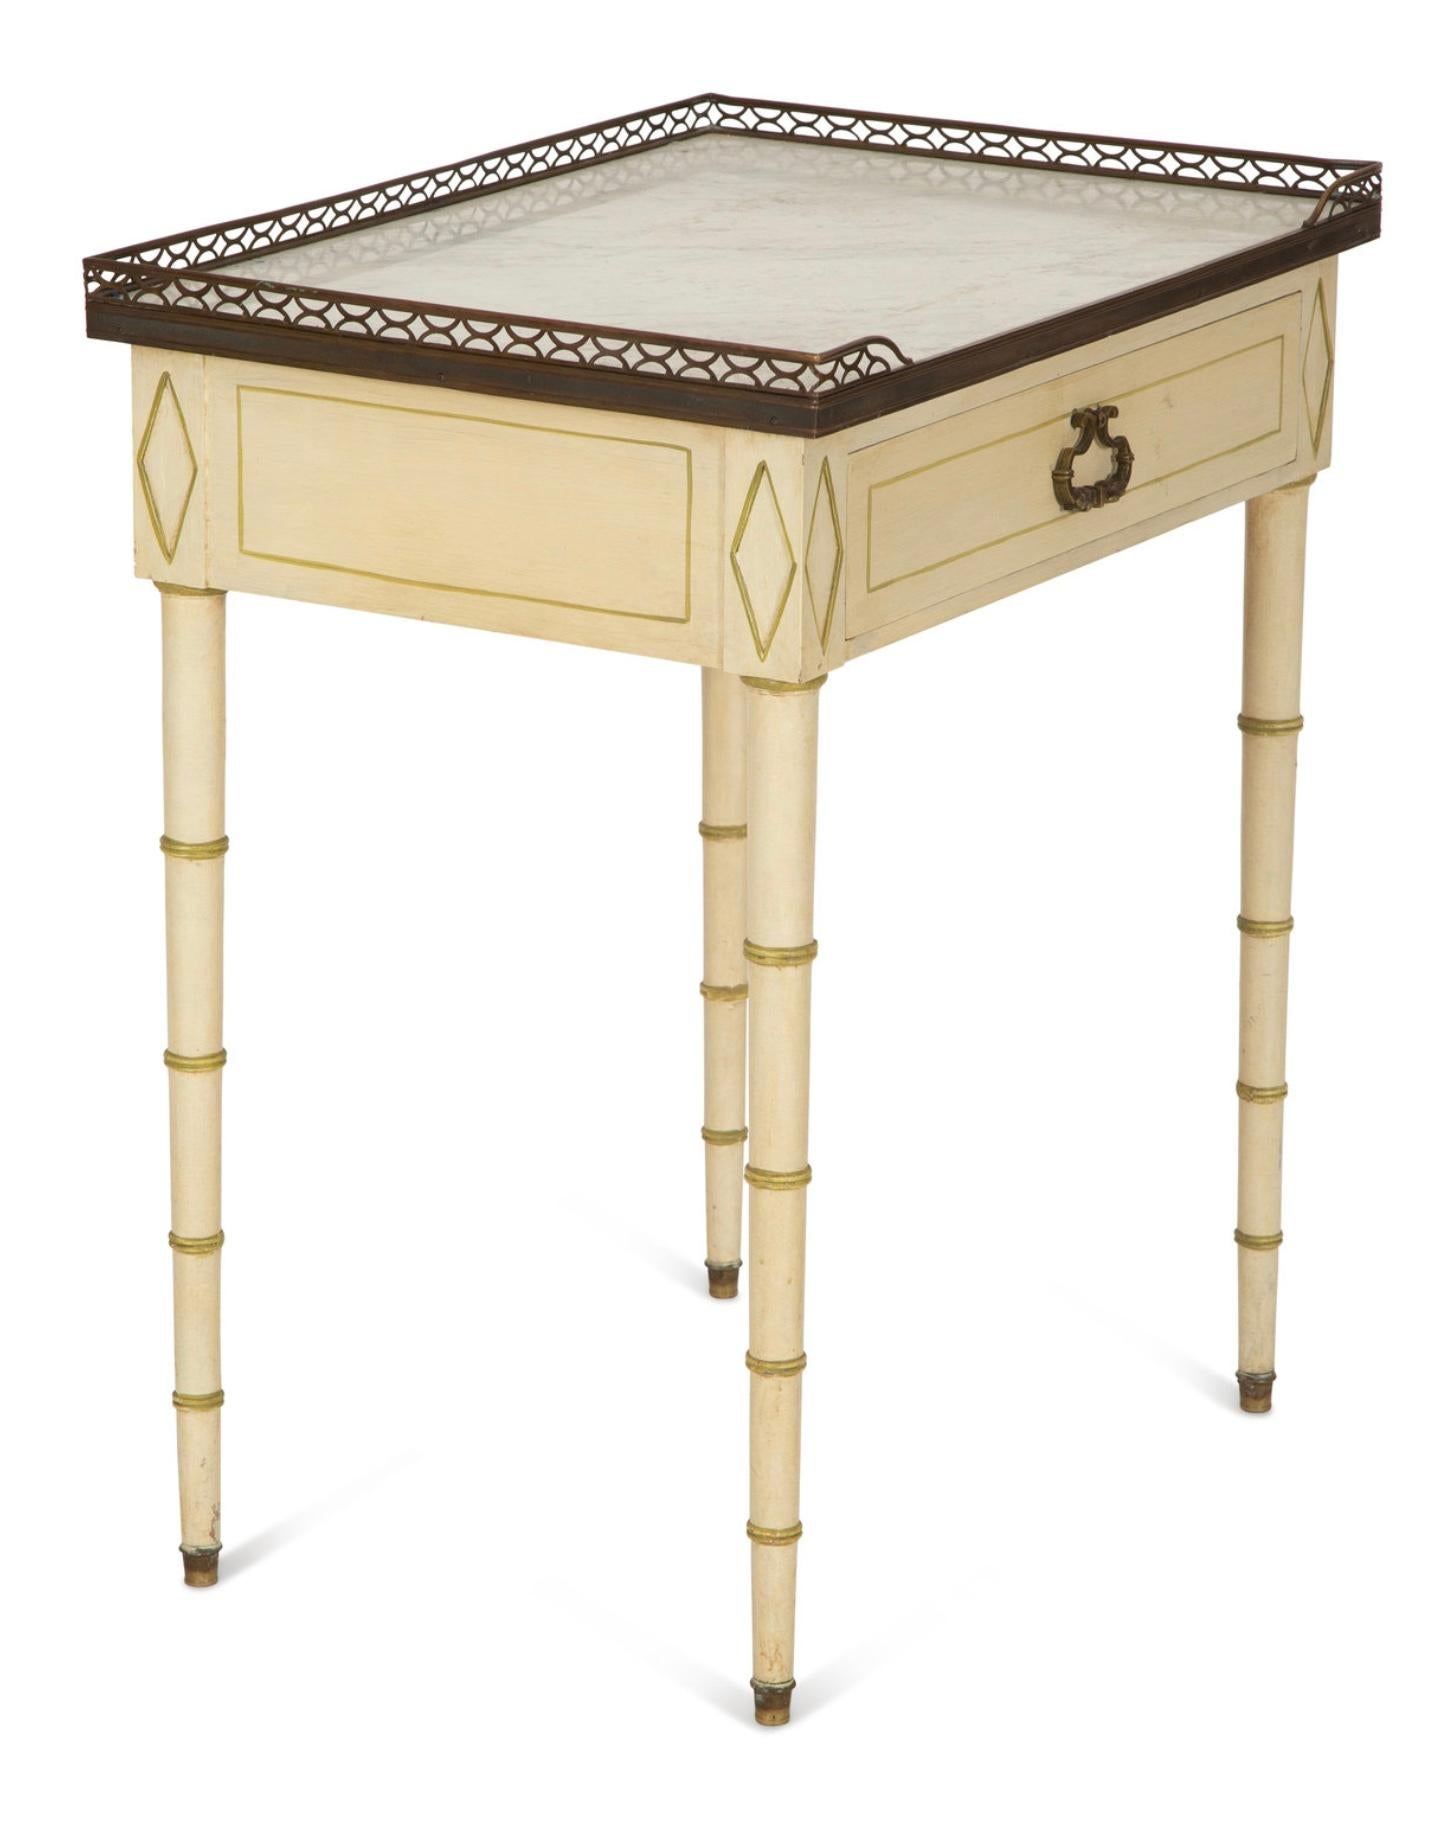 French Regency Style Faux Bamboo Inspired Side Table. Painted Side Table with Brass Three-Quarter Gallery Top with inset Carrara marble. 